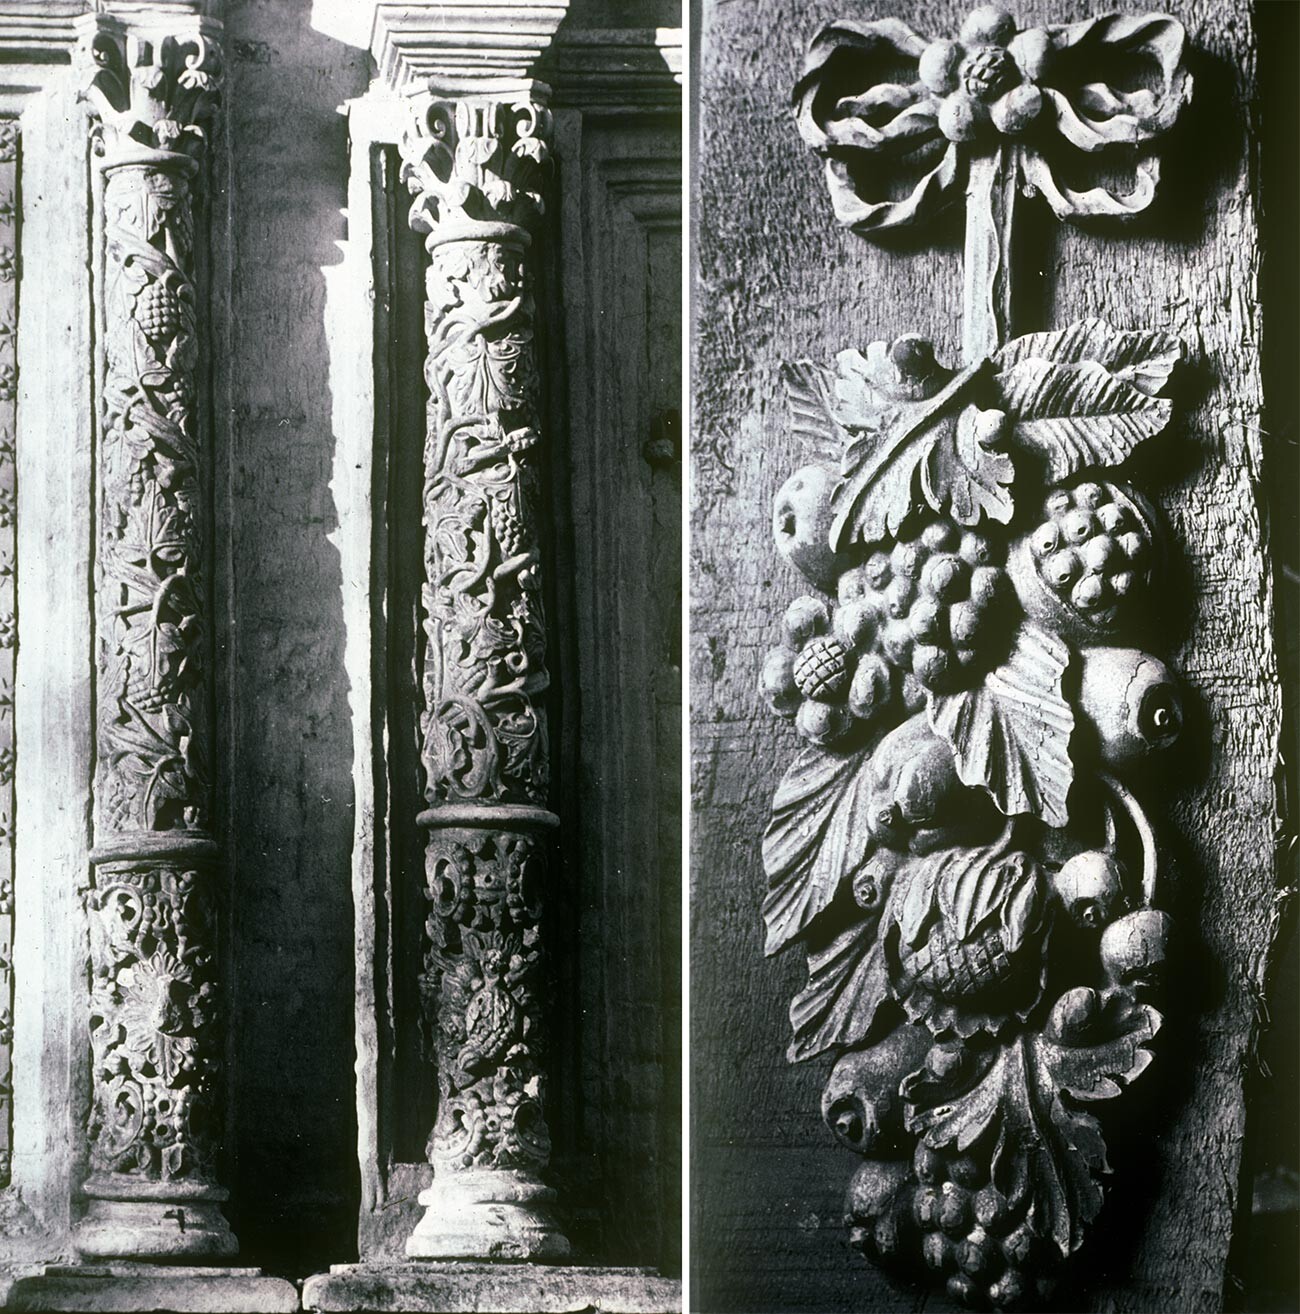 Troitse-Lykovo. Church of the Trinity. 
Left: South facade, limestone columns carved in grapevine motif. September 29, 1979
Right: Interior. Rare fragment of original carved wooden ornament in grapevine motif symbolizing the Eucharist. May 2, 1980.